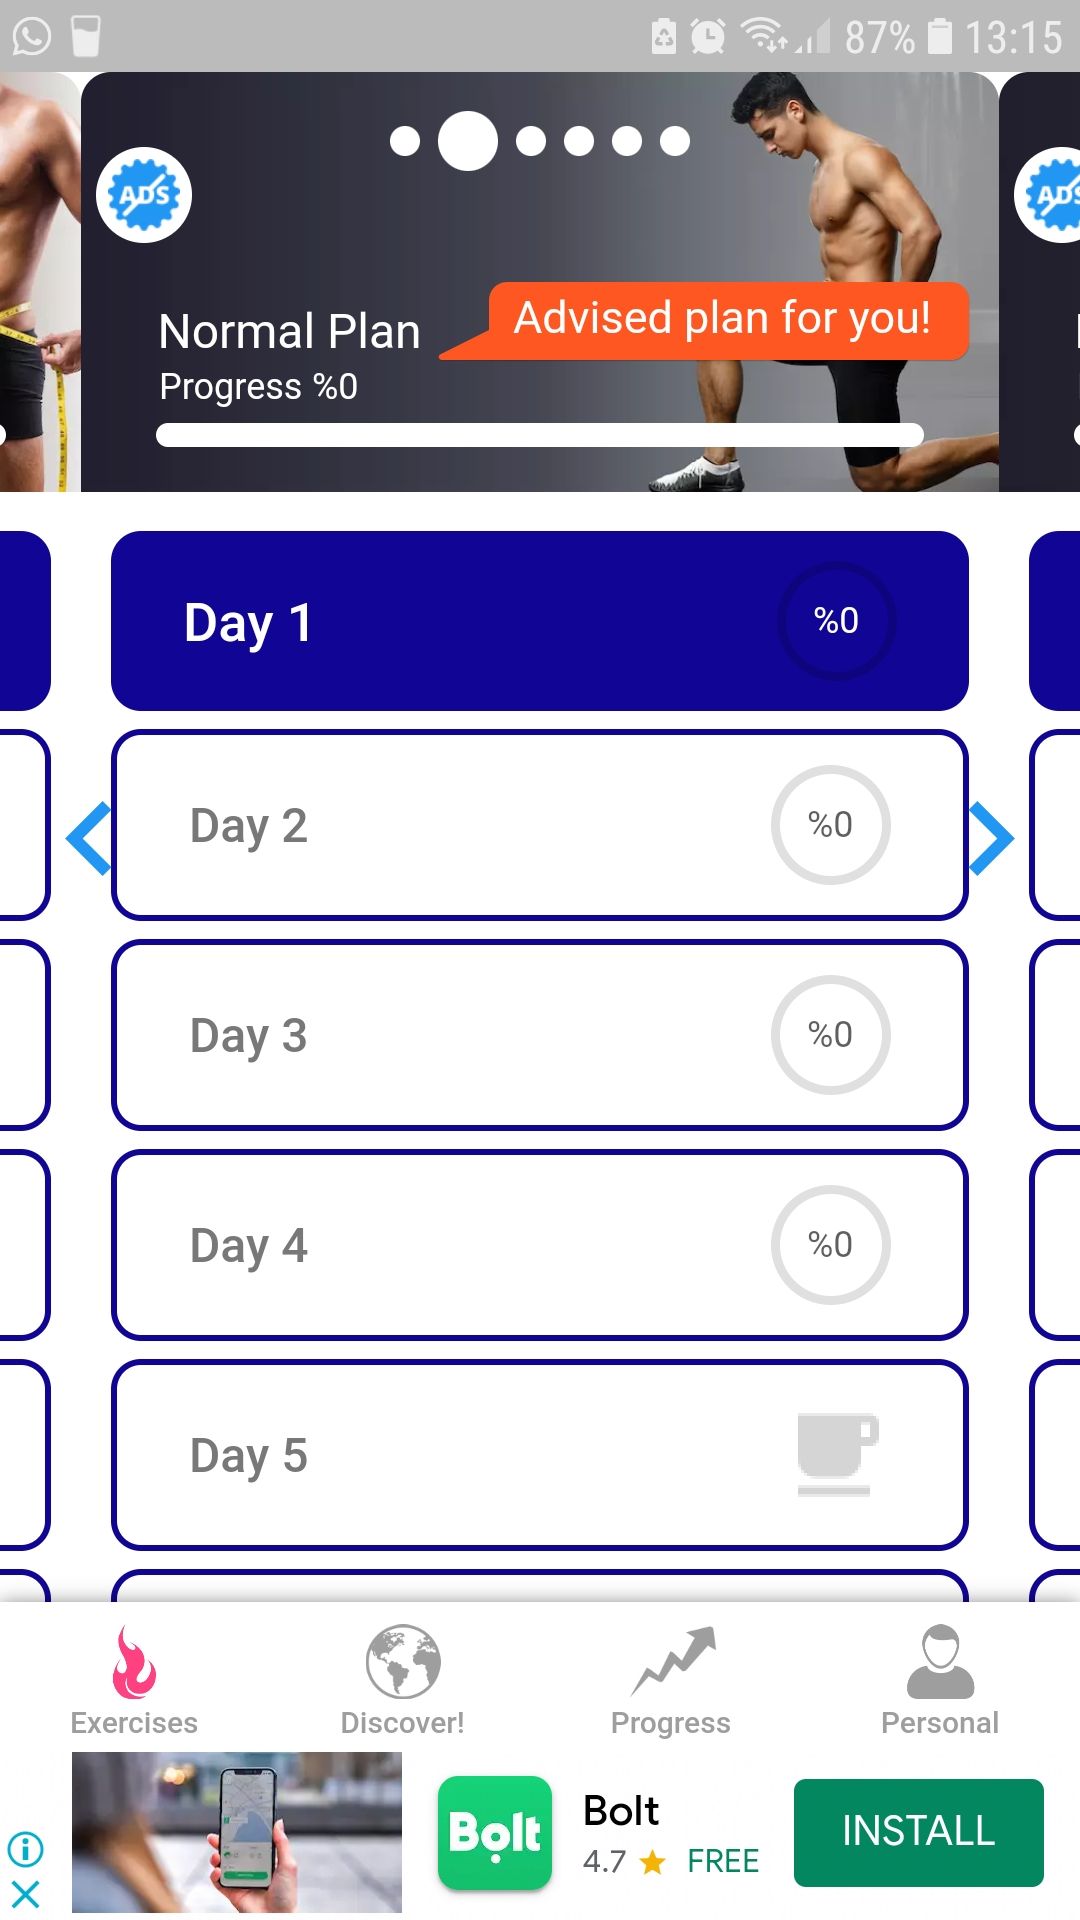 LoseFat mobile fitness app normal daily plan